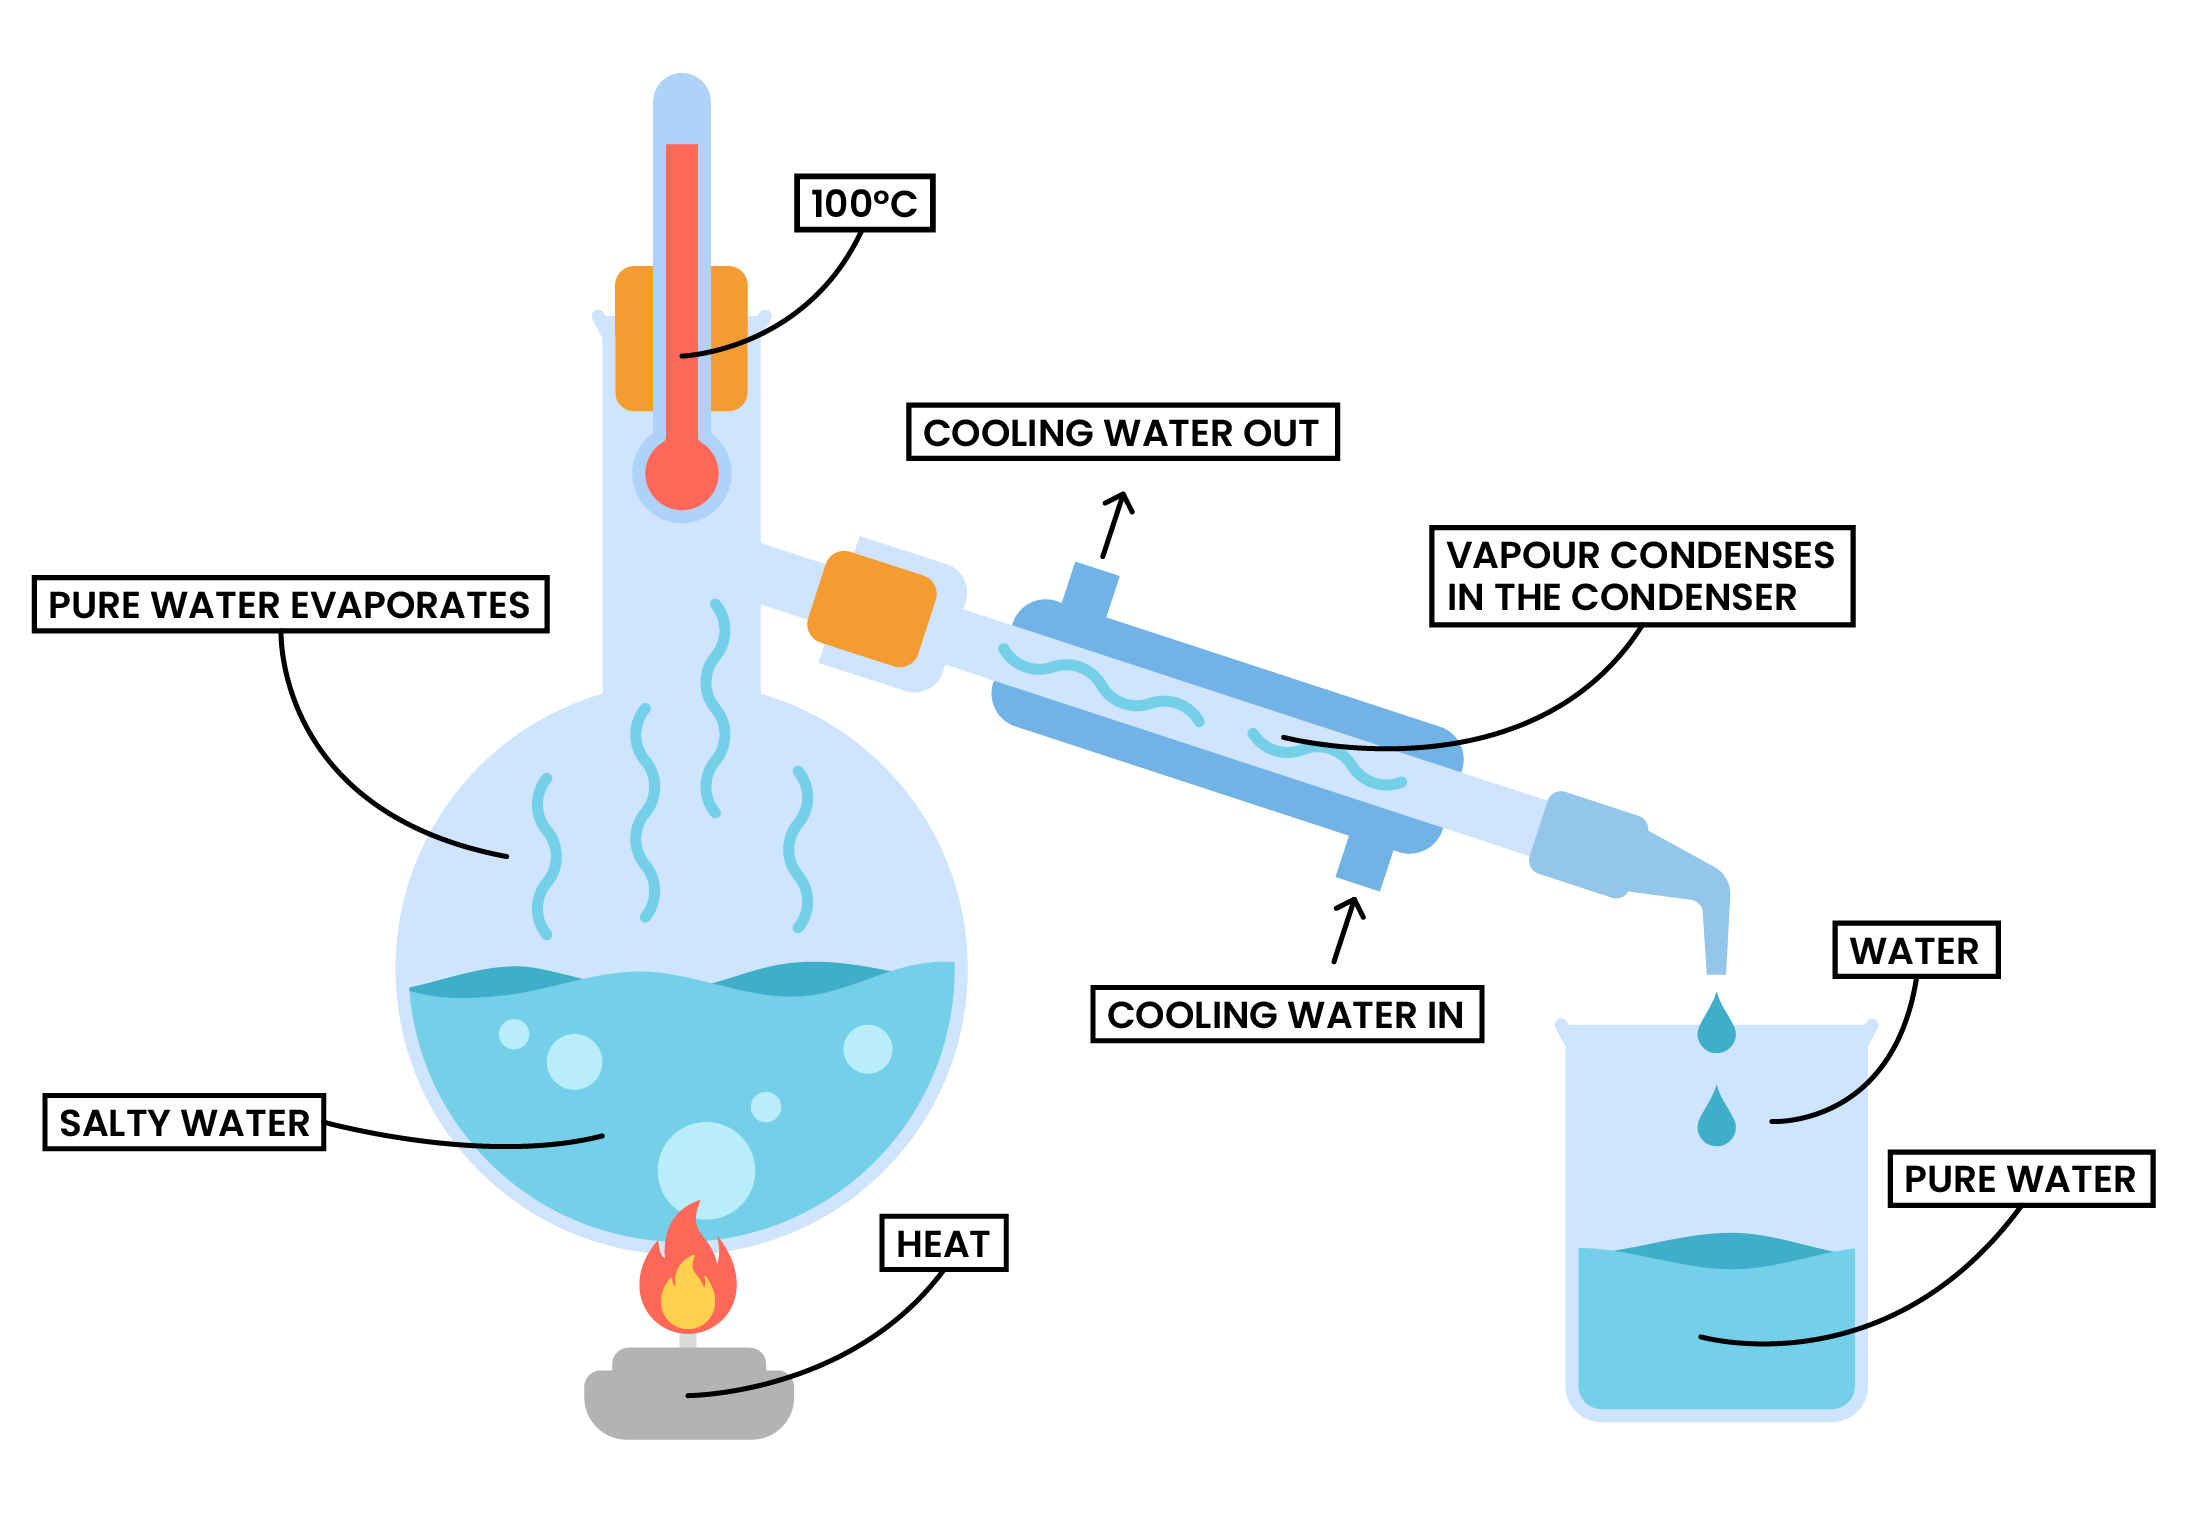 edexcel_igcse_chemistry_topic 02_elements, compounds, and mixtures_004_distillation of water from a solution labelled diagram